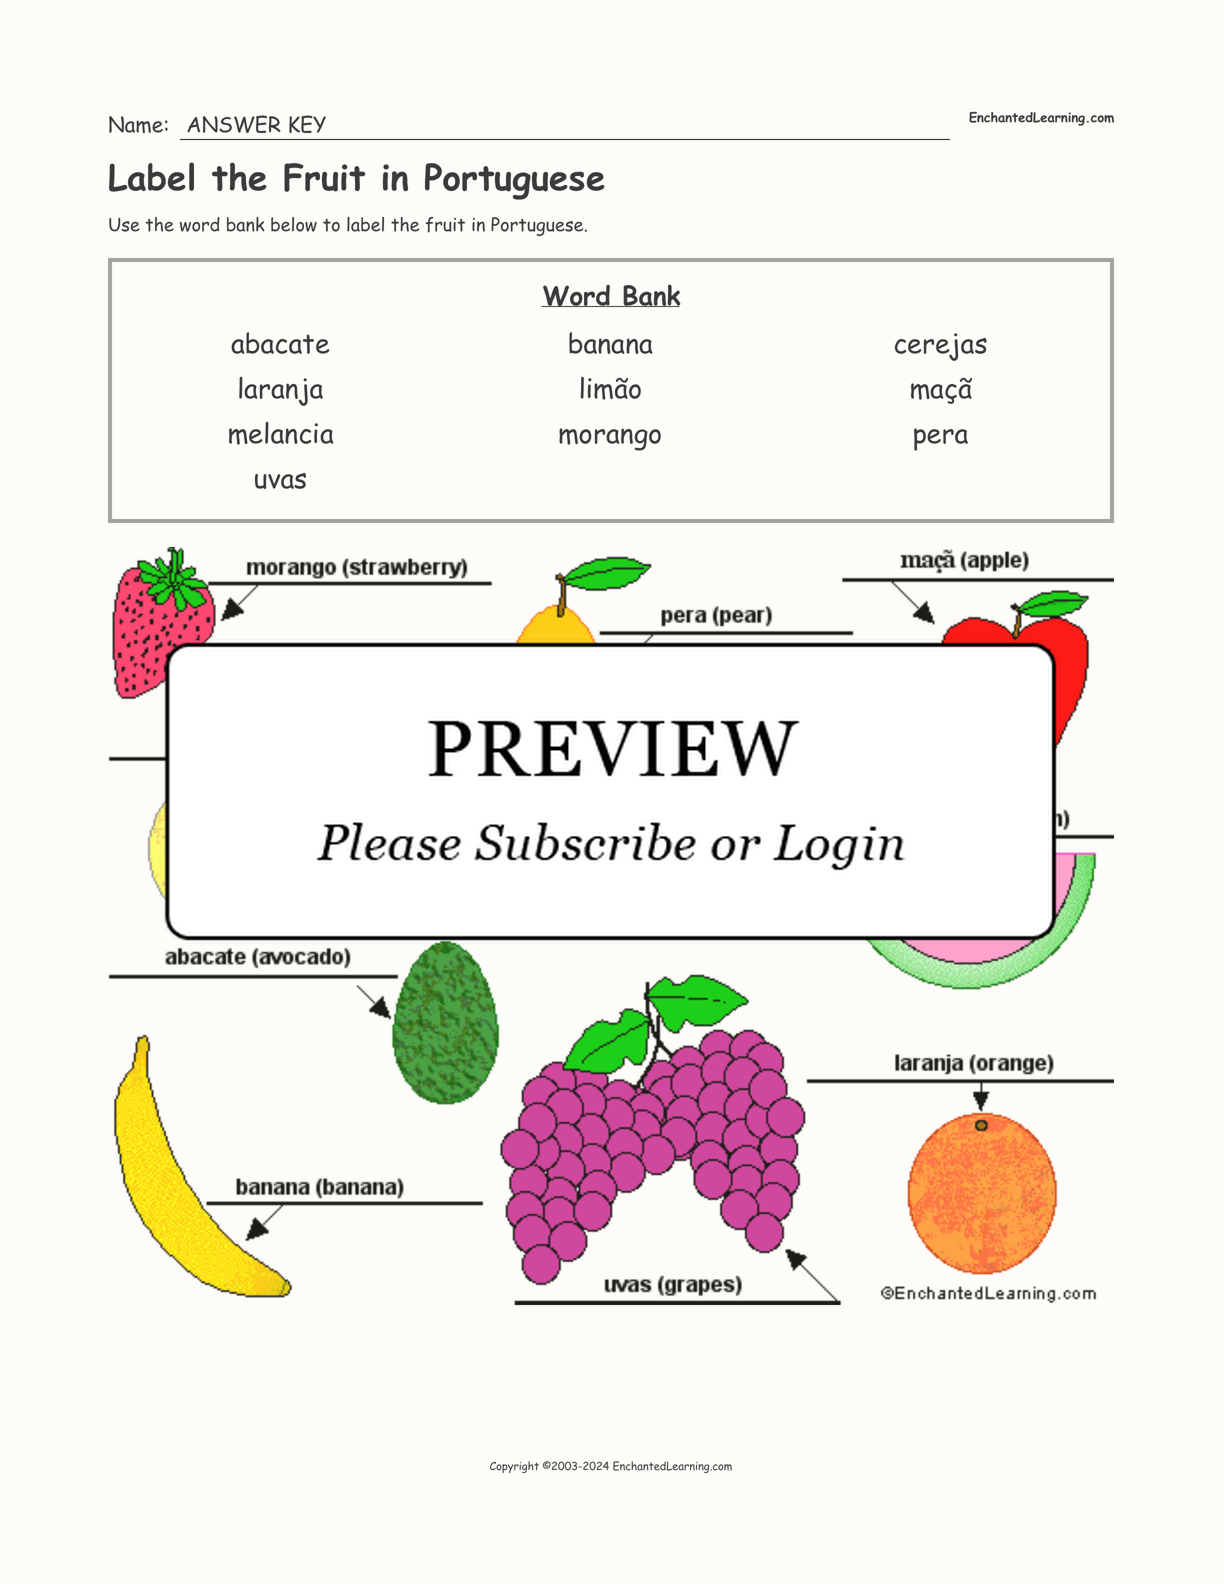 Label the Fruit in Portuguese interactive worksheet page 2